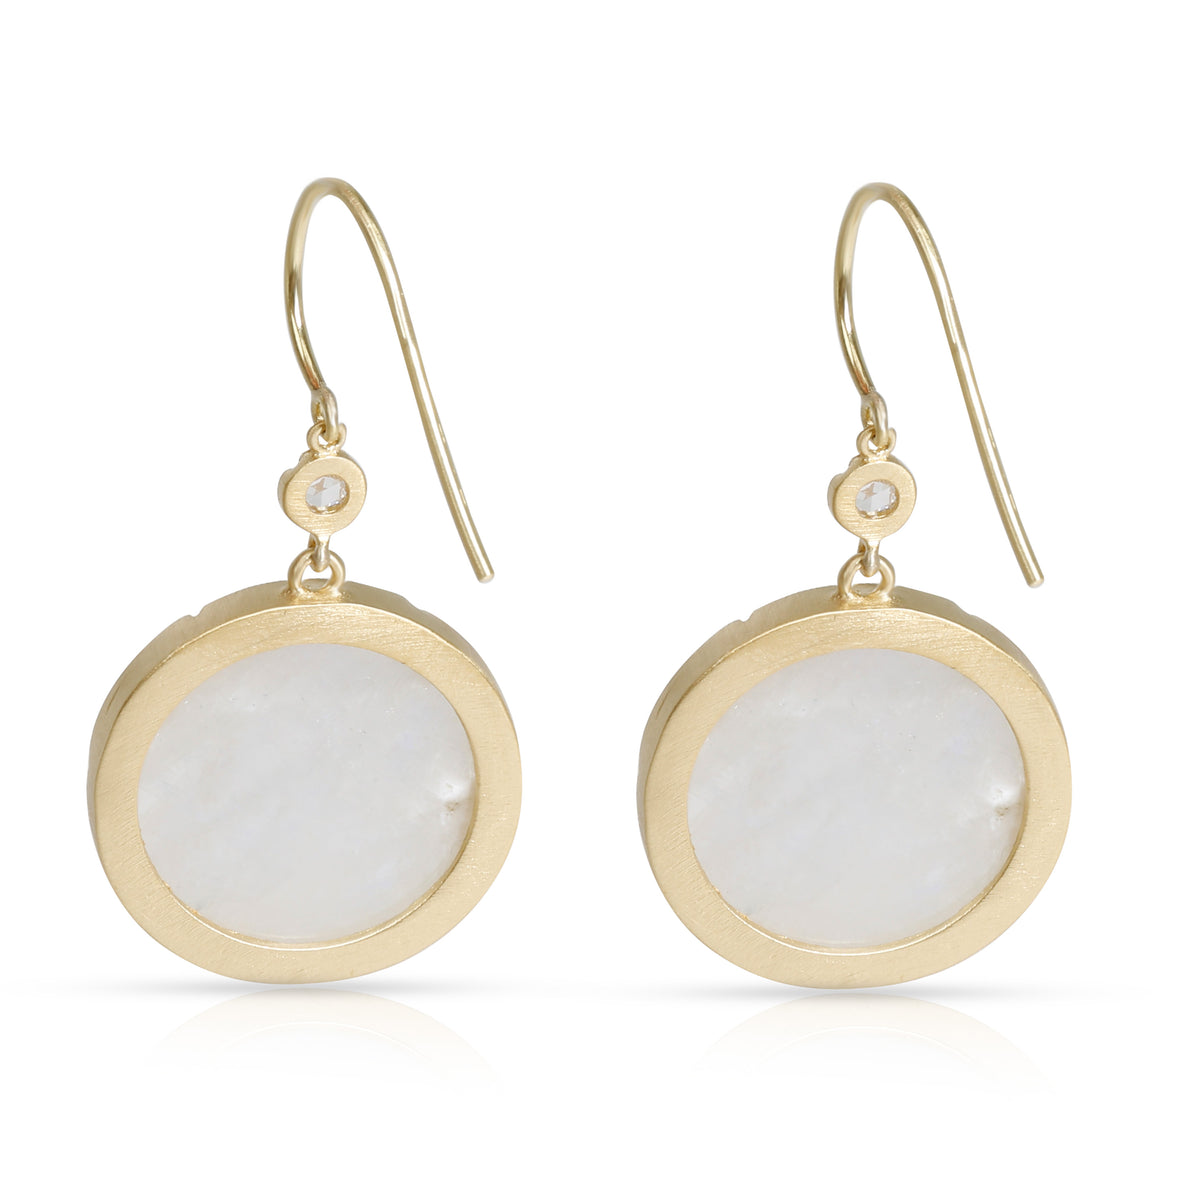 Irene Neuwirth Moonstone Drop Earrings with Scallop in 18K Yellow Gold